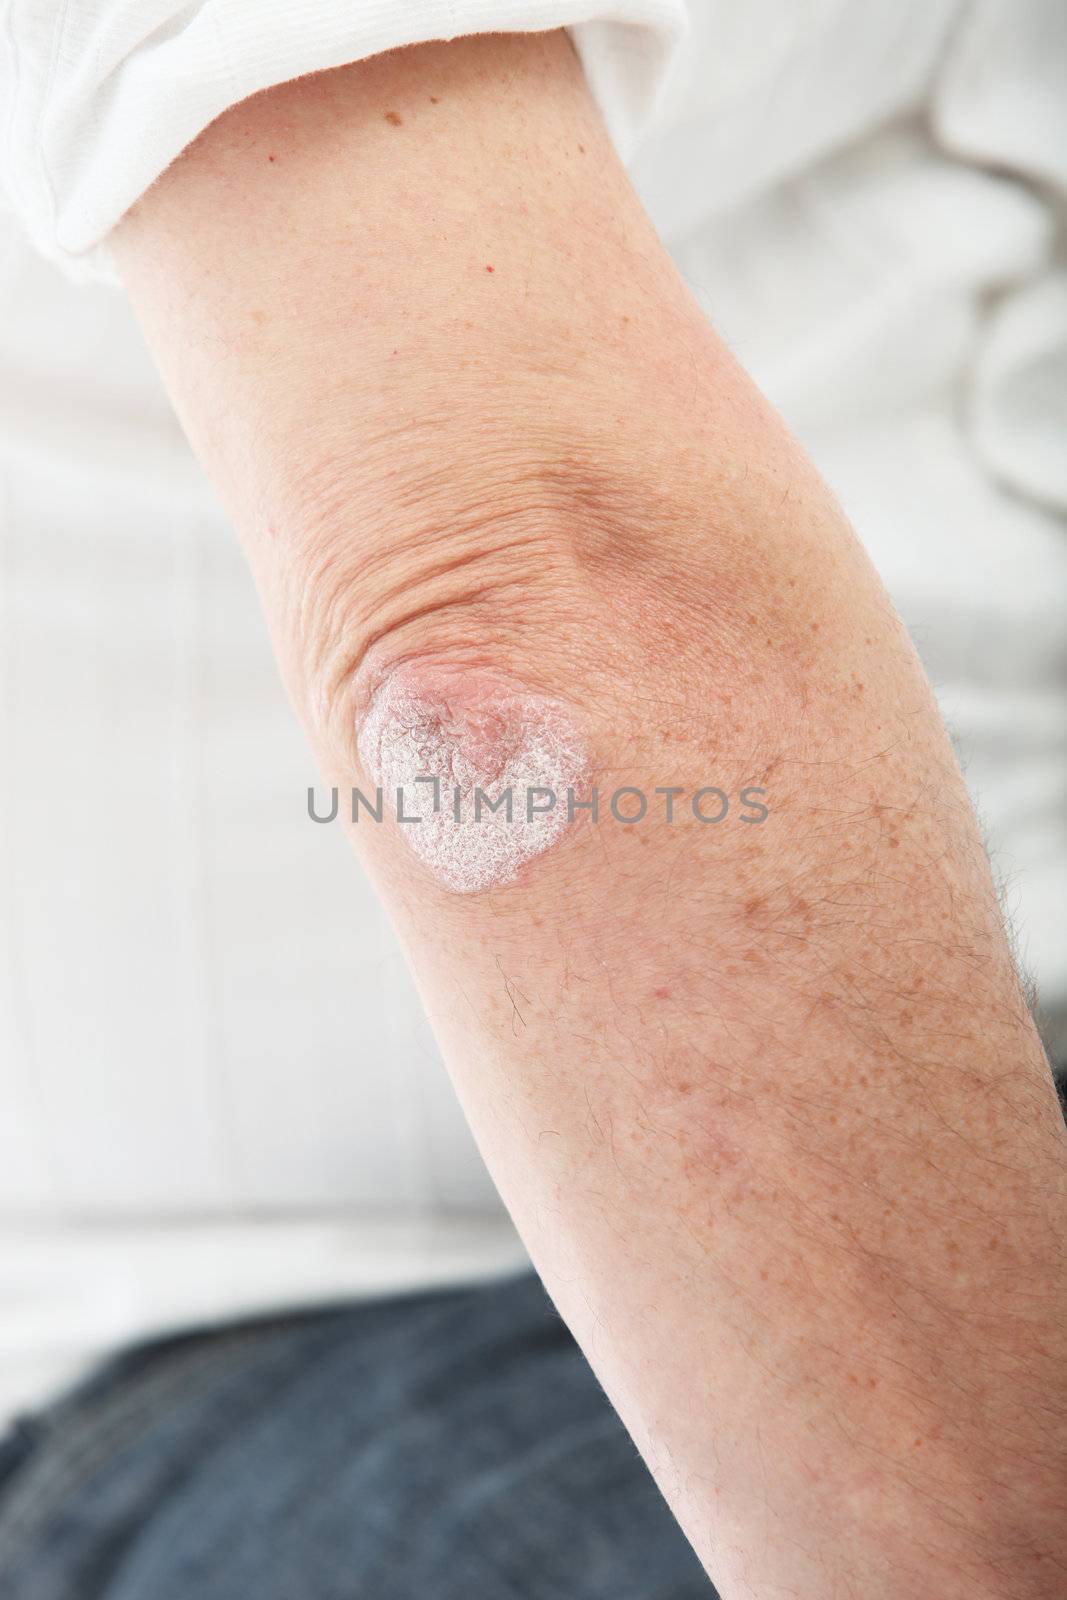 Psoriasis skin or deciding on the elbow - Close-up 